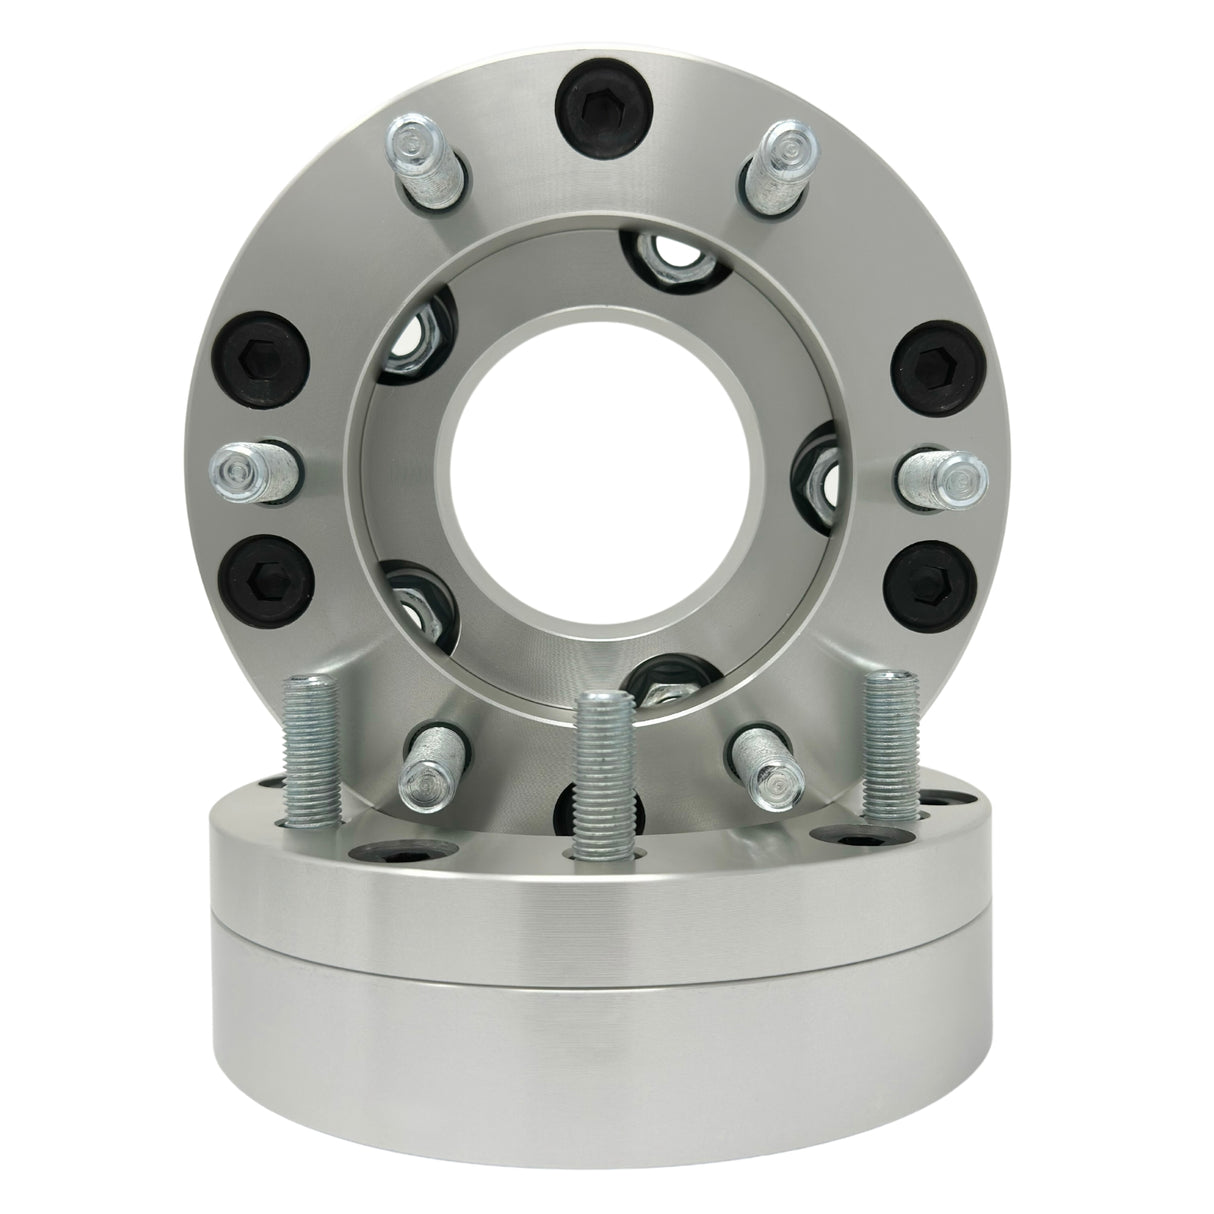 5x5.5 to 6x135 2-Piece Wheel Adapter 2” Inch (50mm) 14x2.0 Studs & Lug Nuts 108mm Center Bore | 5x139.7 to 6x135